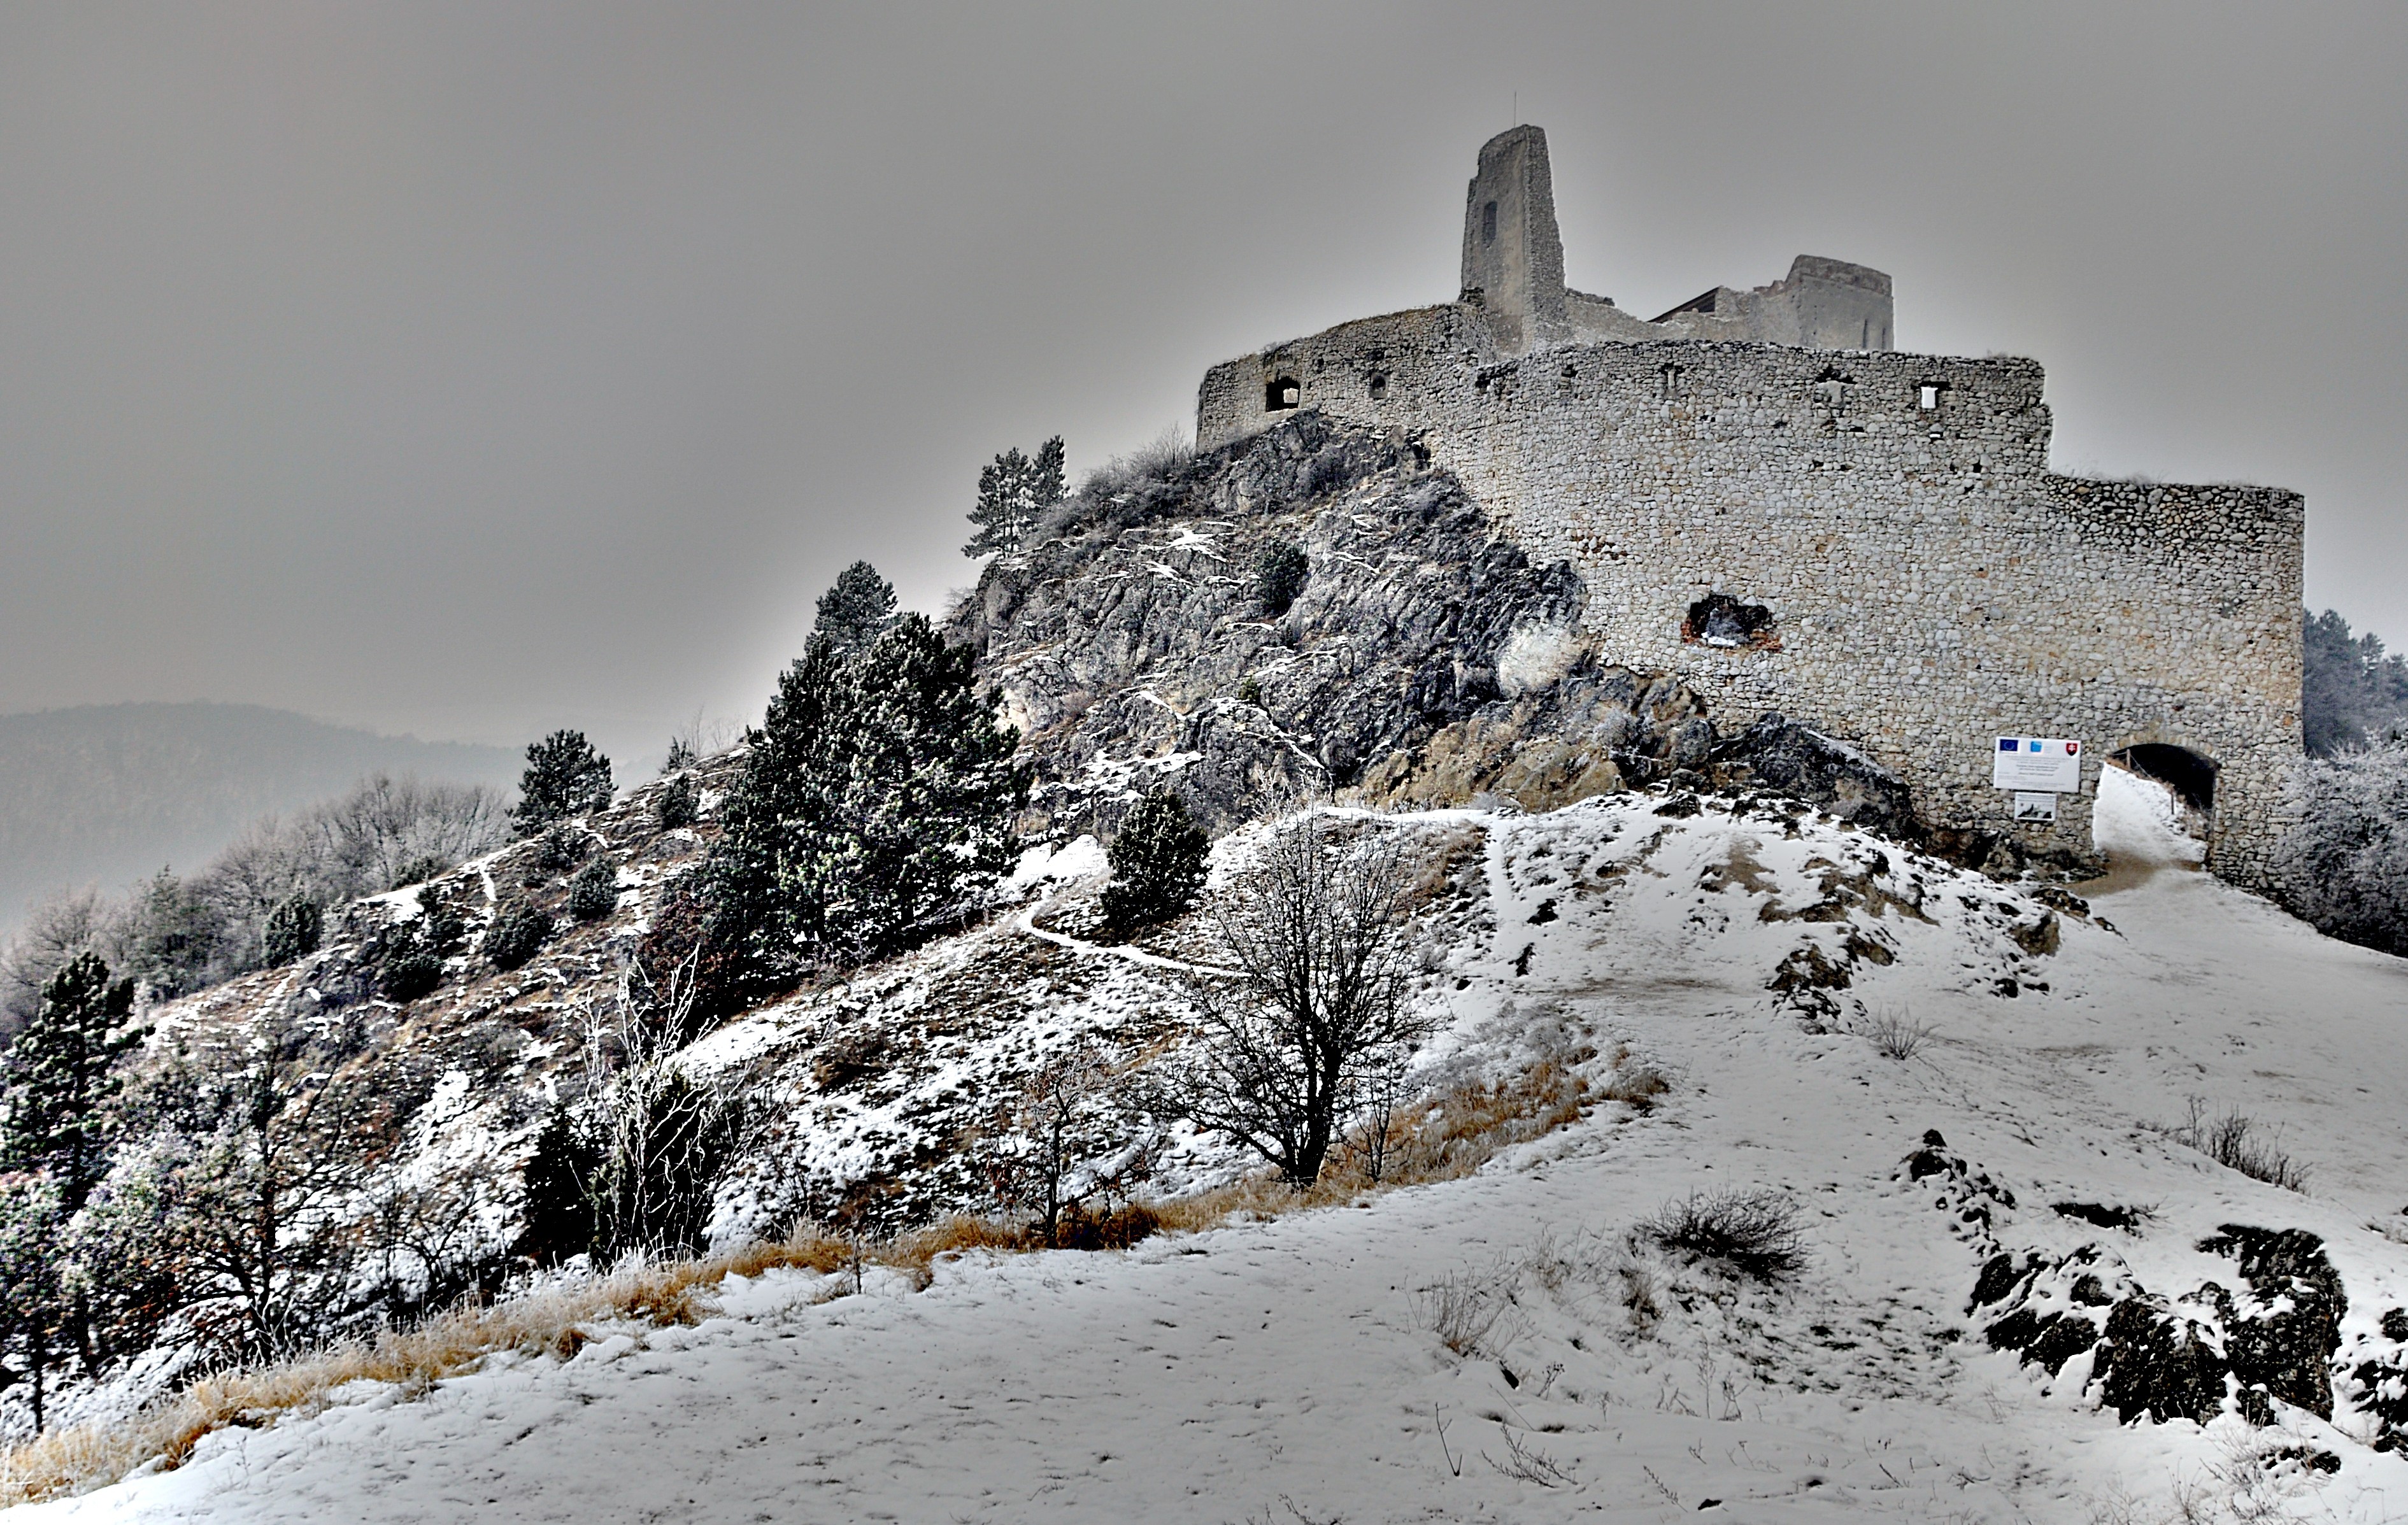 General 3781x2395 castle nature Slovakia hills rocks trees winter snow ancient ruins ice cold outdoors